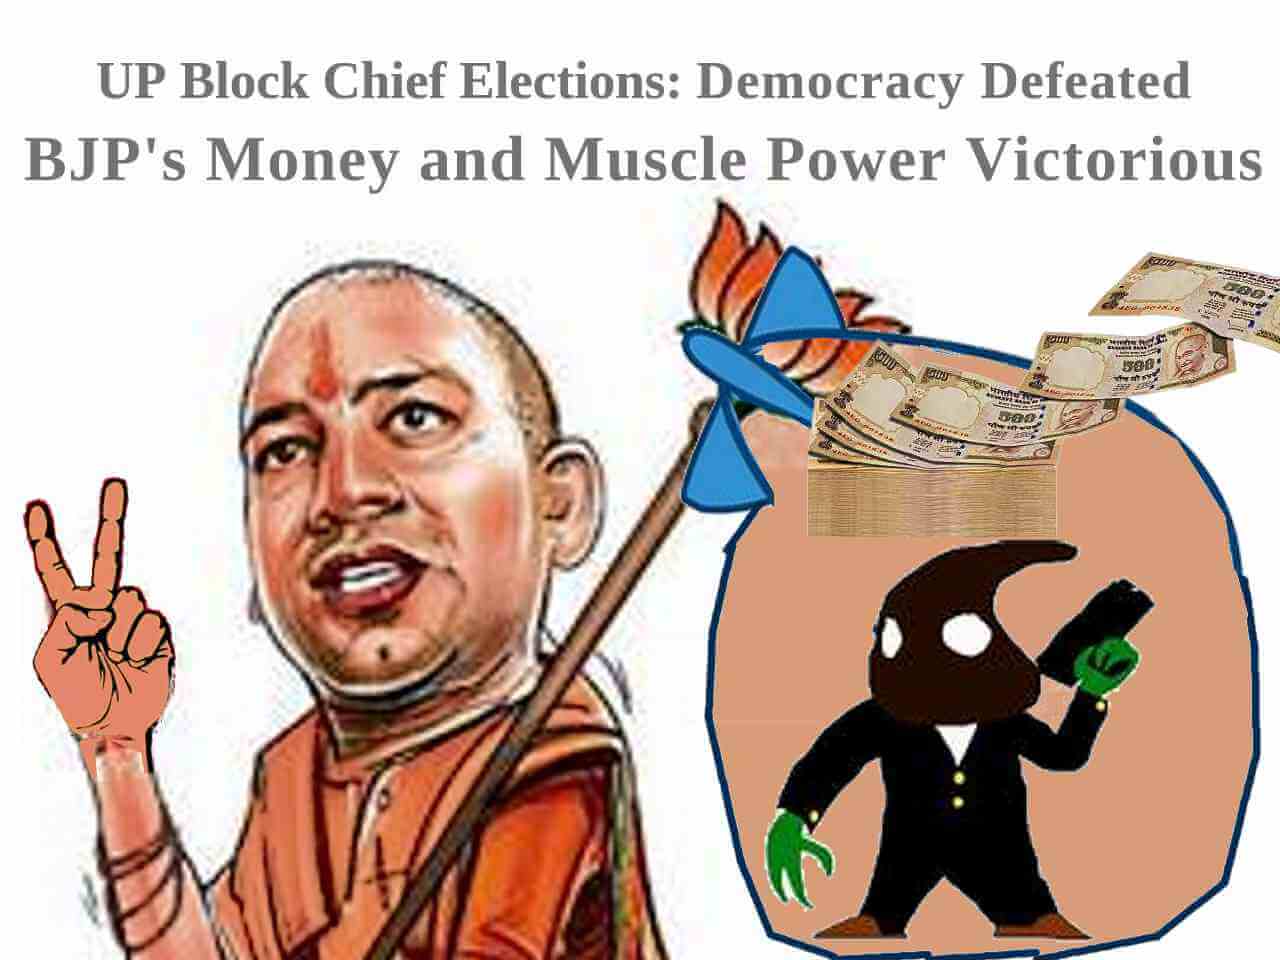 UP Block Chief Elections - Democracy Defeated